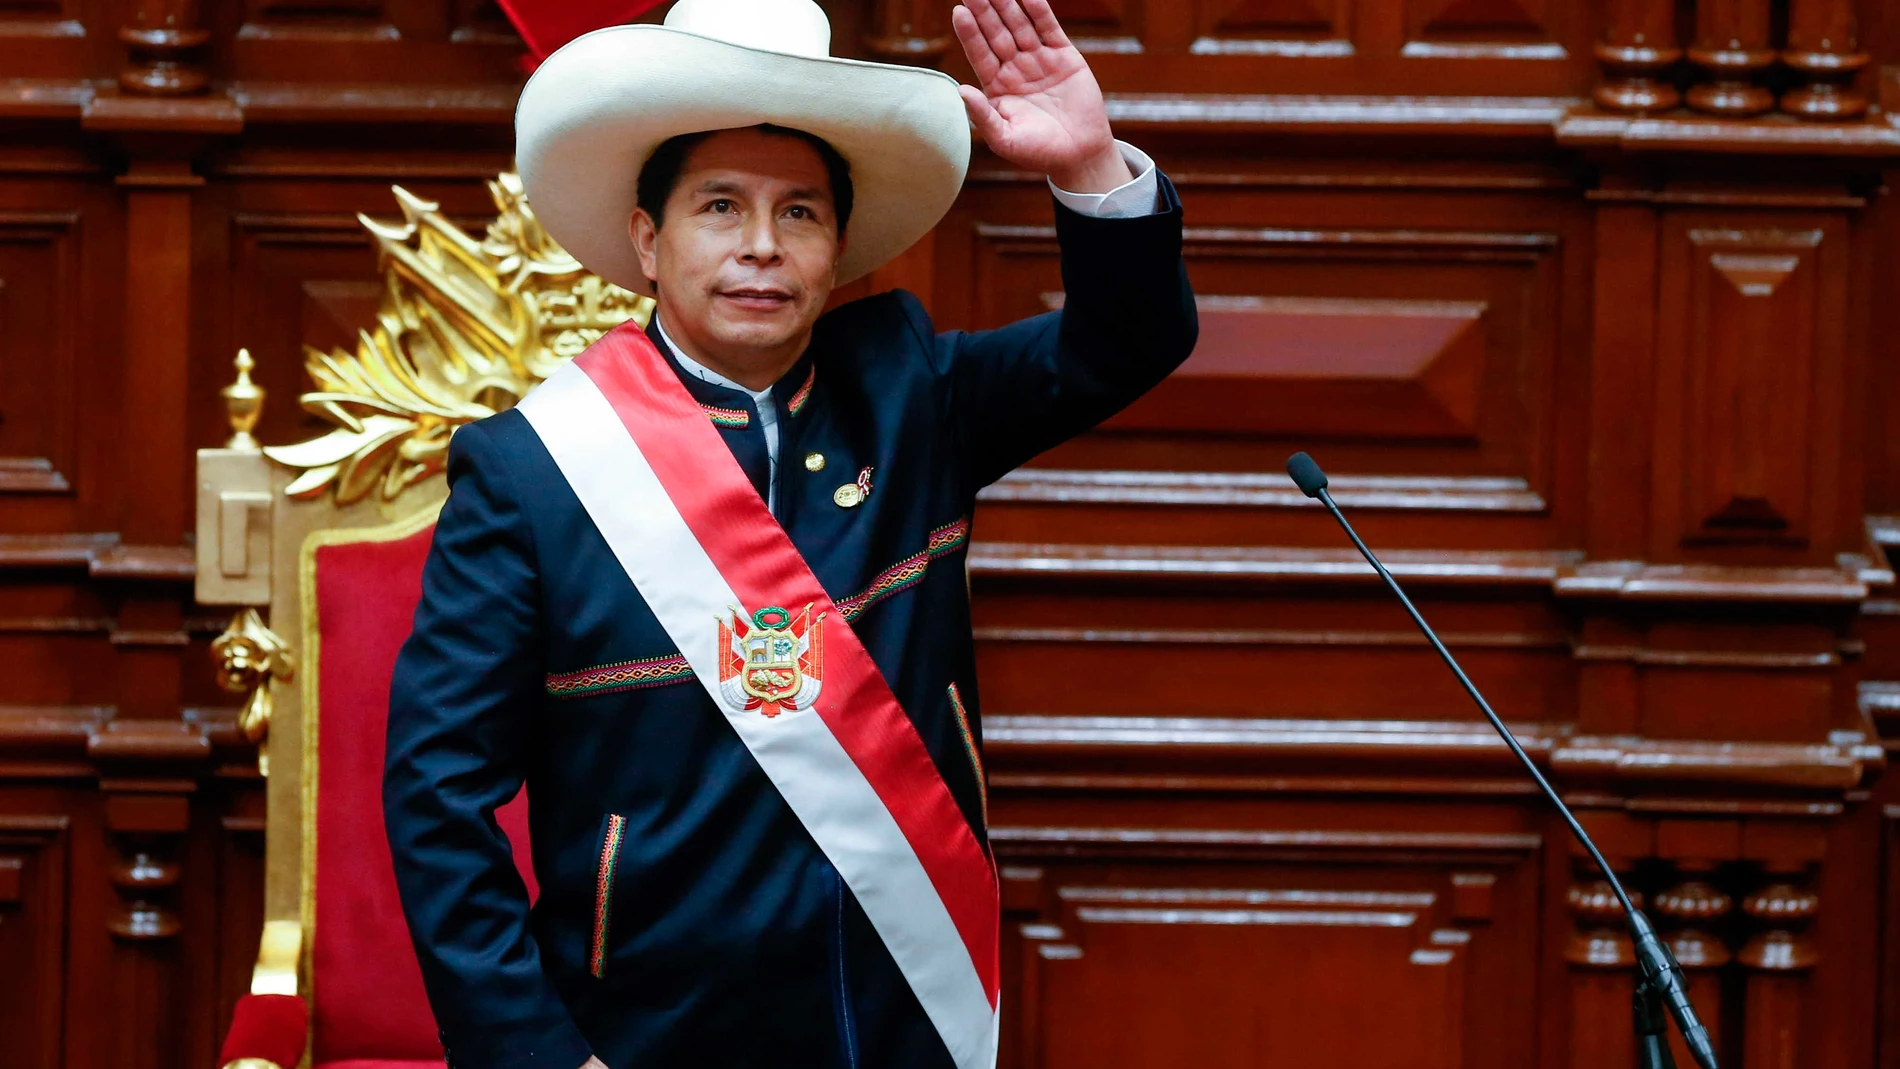 Lima (Peru), 28/07/2021.- A handout photo made available by the Presidency of Peru shows Pedro Castillo after his Investiture ceremony as head of State, in Lima, Peru, 28 July 2021. Pedro Castillo assumes today the Presidency of Peru for the period 2021-2026. EFE/EPA/Presidency of Peru HANDOUT ONLY AVAILABLE TO ILLUSTRATE THE ACCOMPANYING NEWS (MANDATORY CREDIT) HANDOUT EDITORIAL USE ONLY/NO SALES